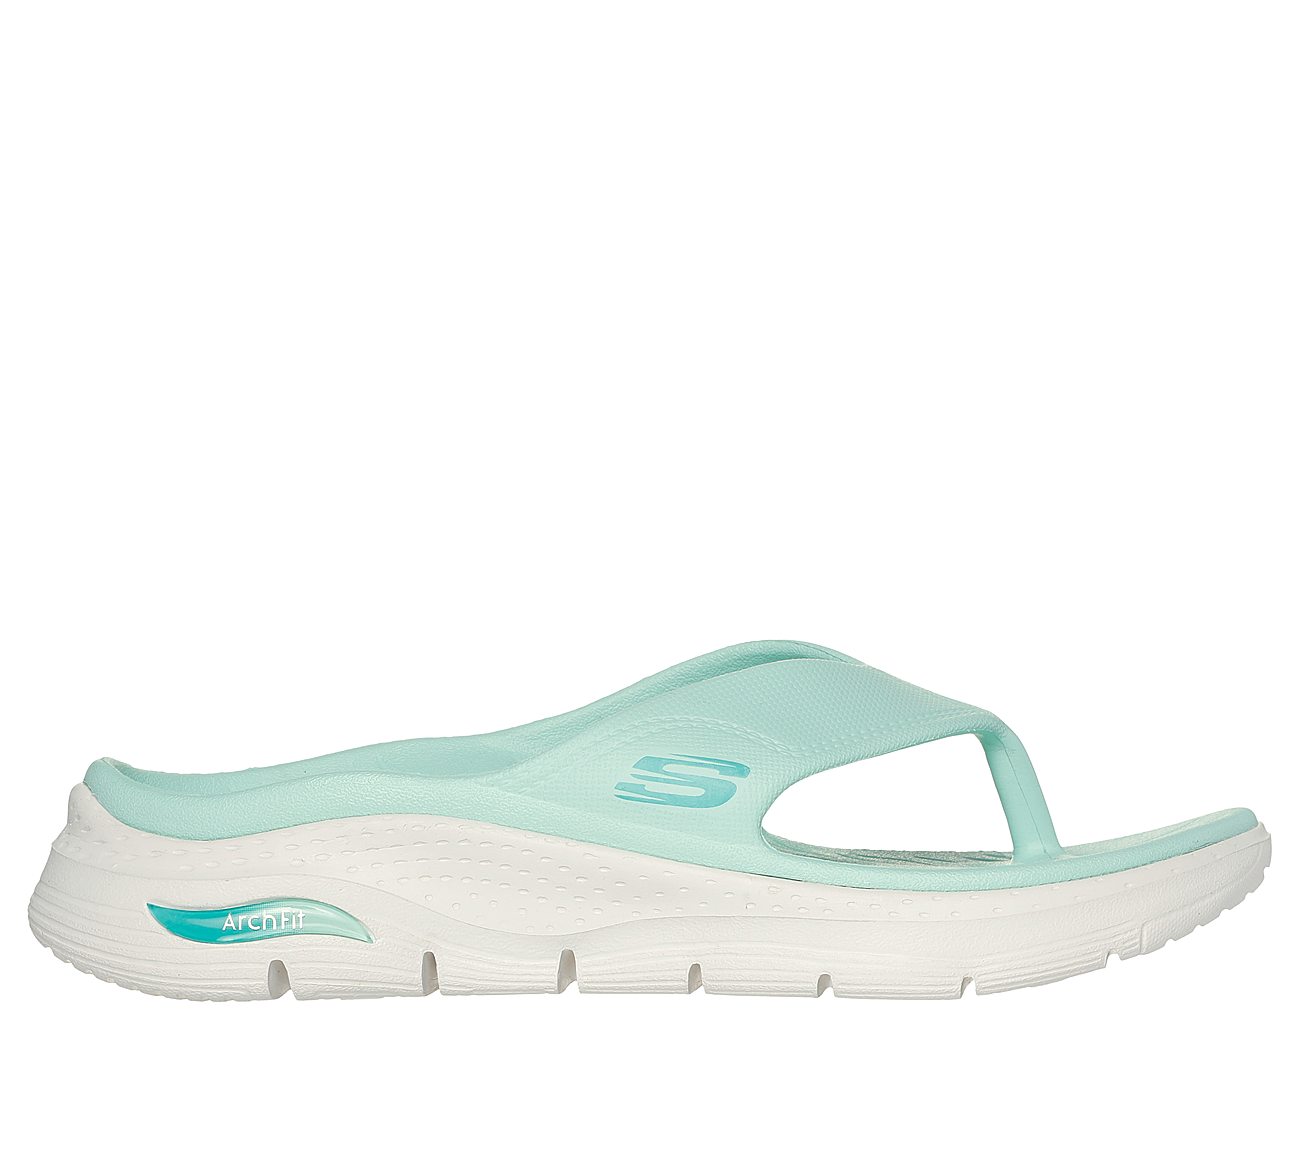 ARCH FIT FOAMIES - LIFESTYLE, MINT Footwear Lateral View